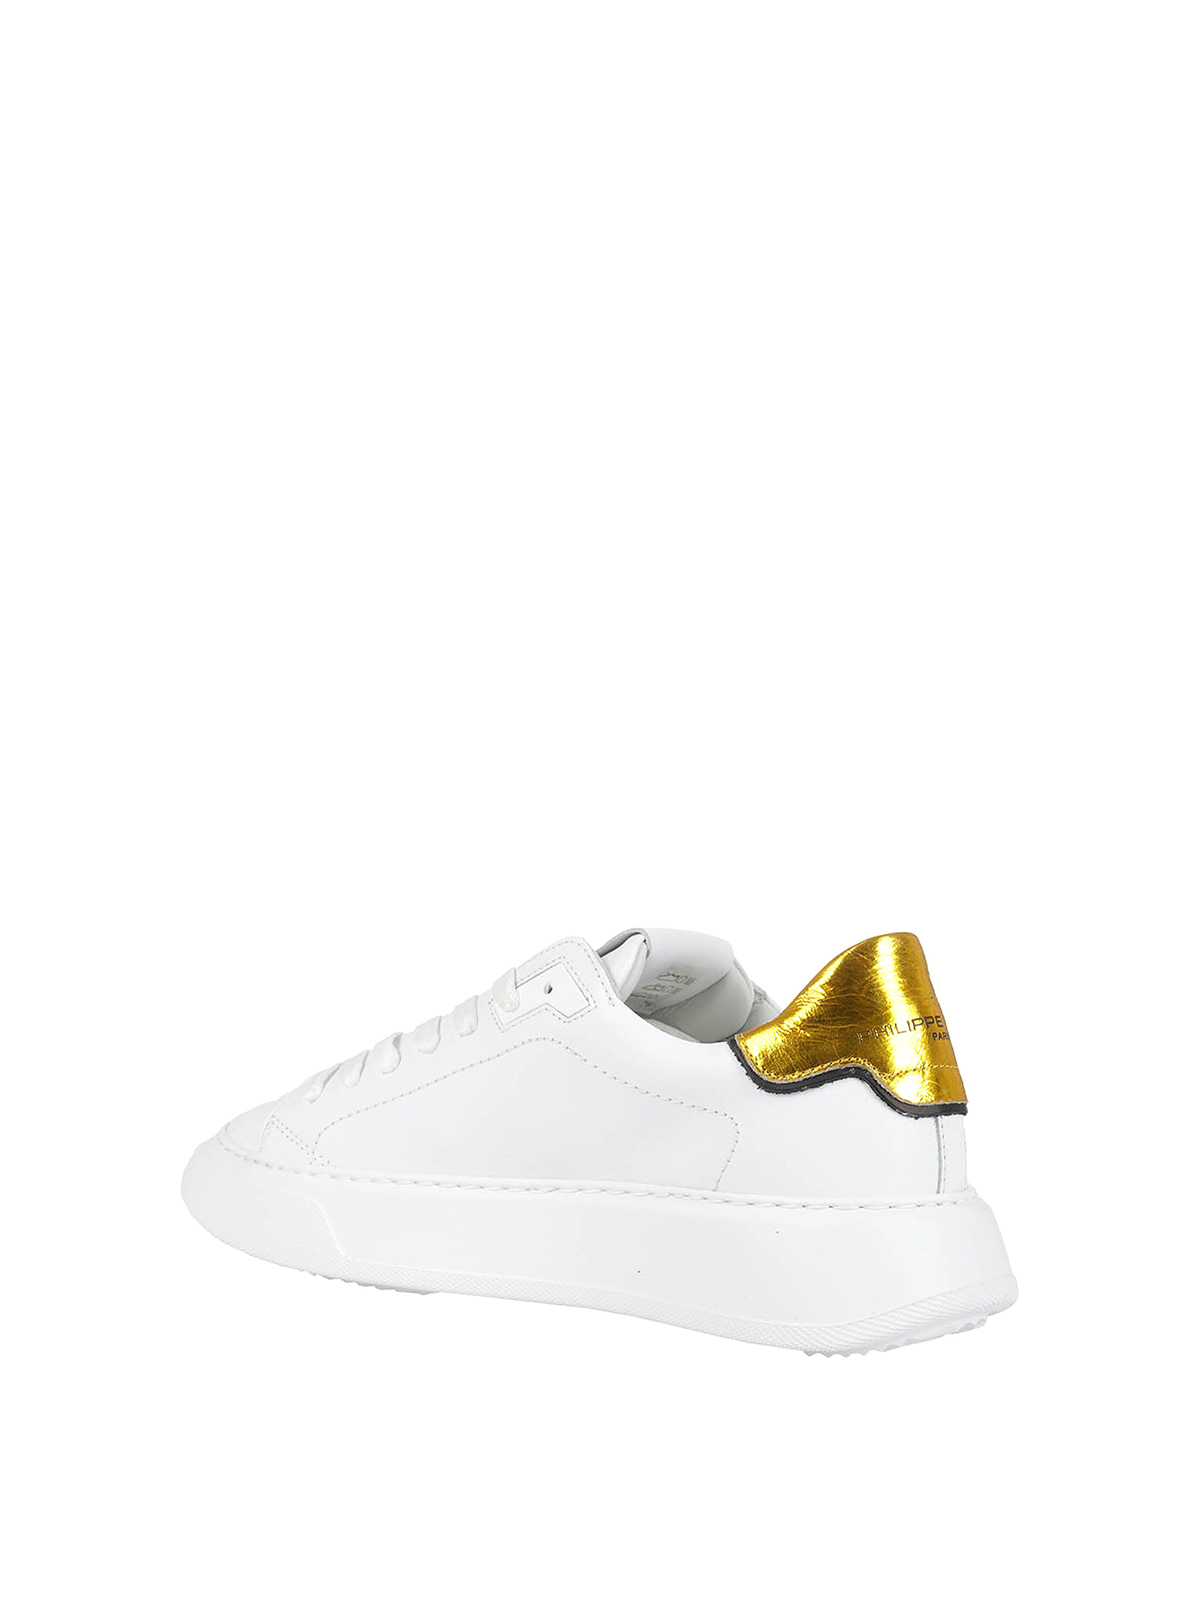 Trainers Philippe Model - Temple sneakers - BTLDWHT | Shop online at iKRIX